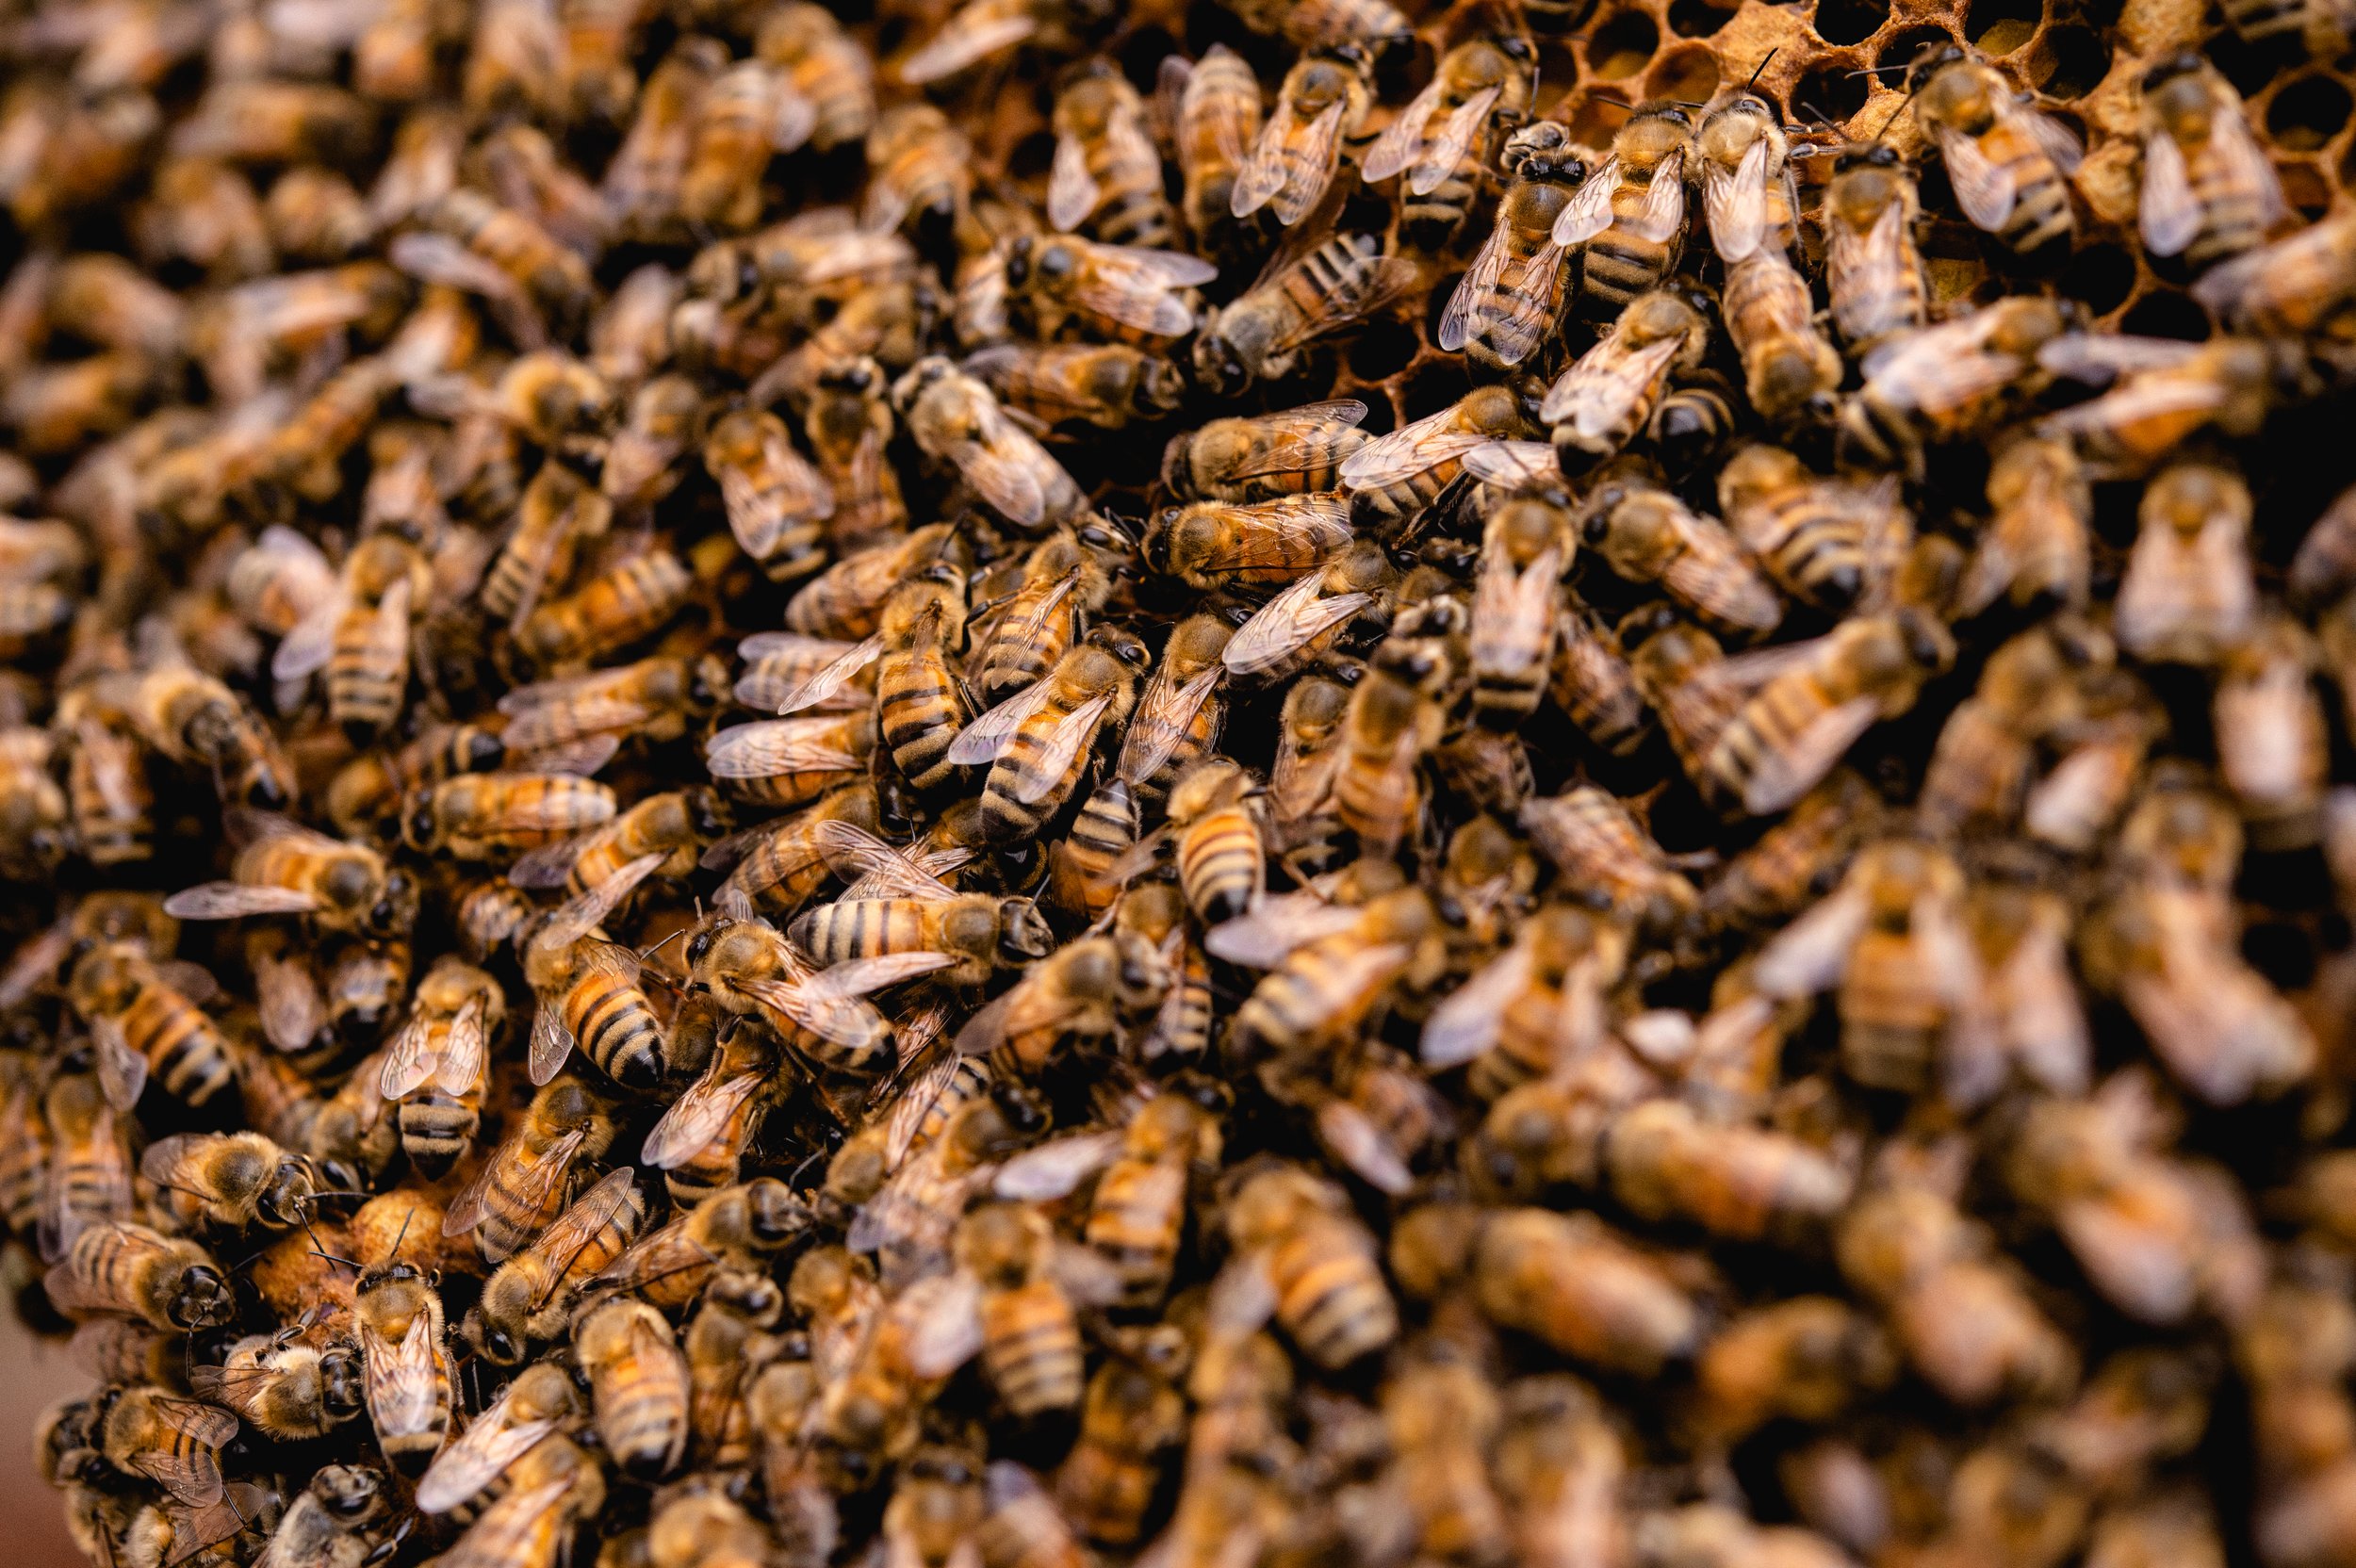  A frame of honeybees after being transported to a new home. Birmingham, AL. 2020. 